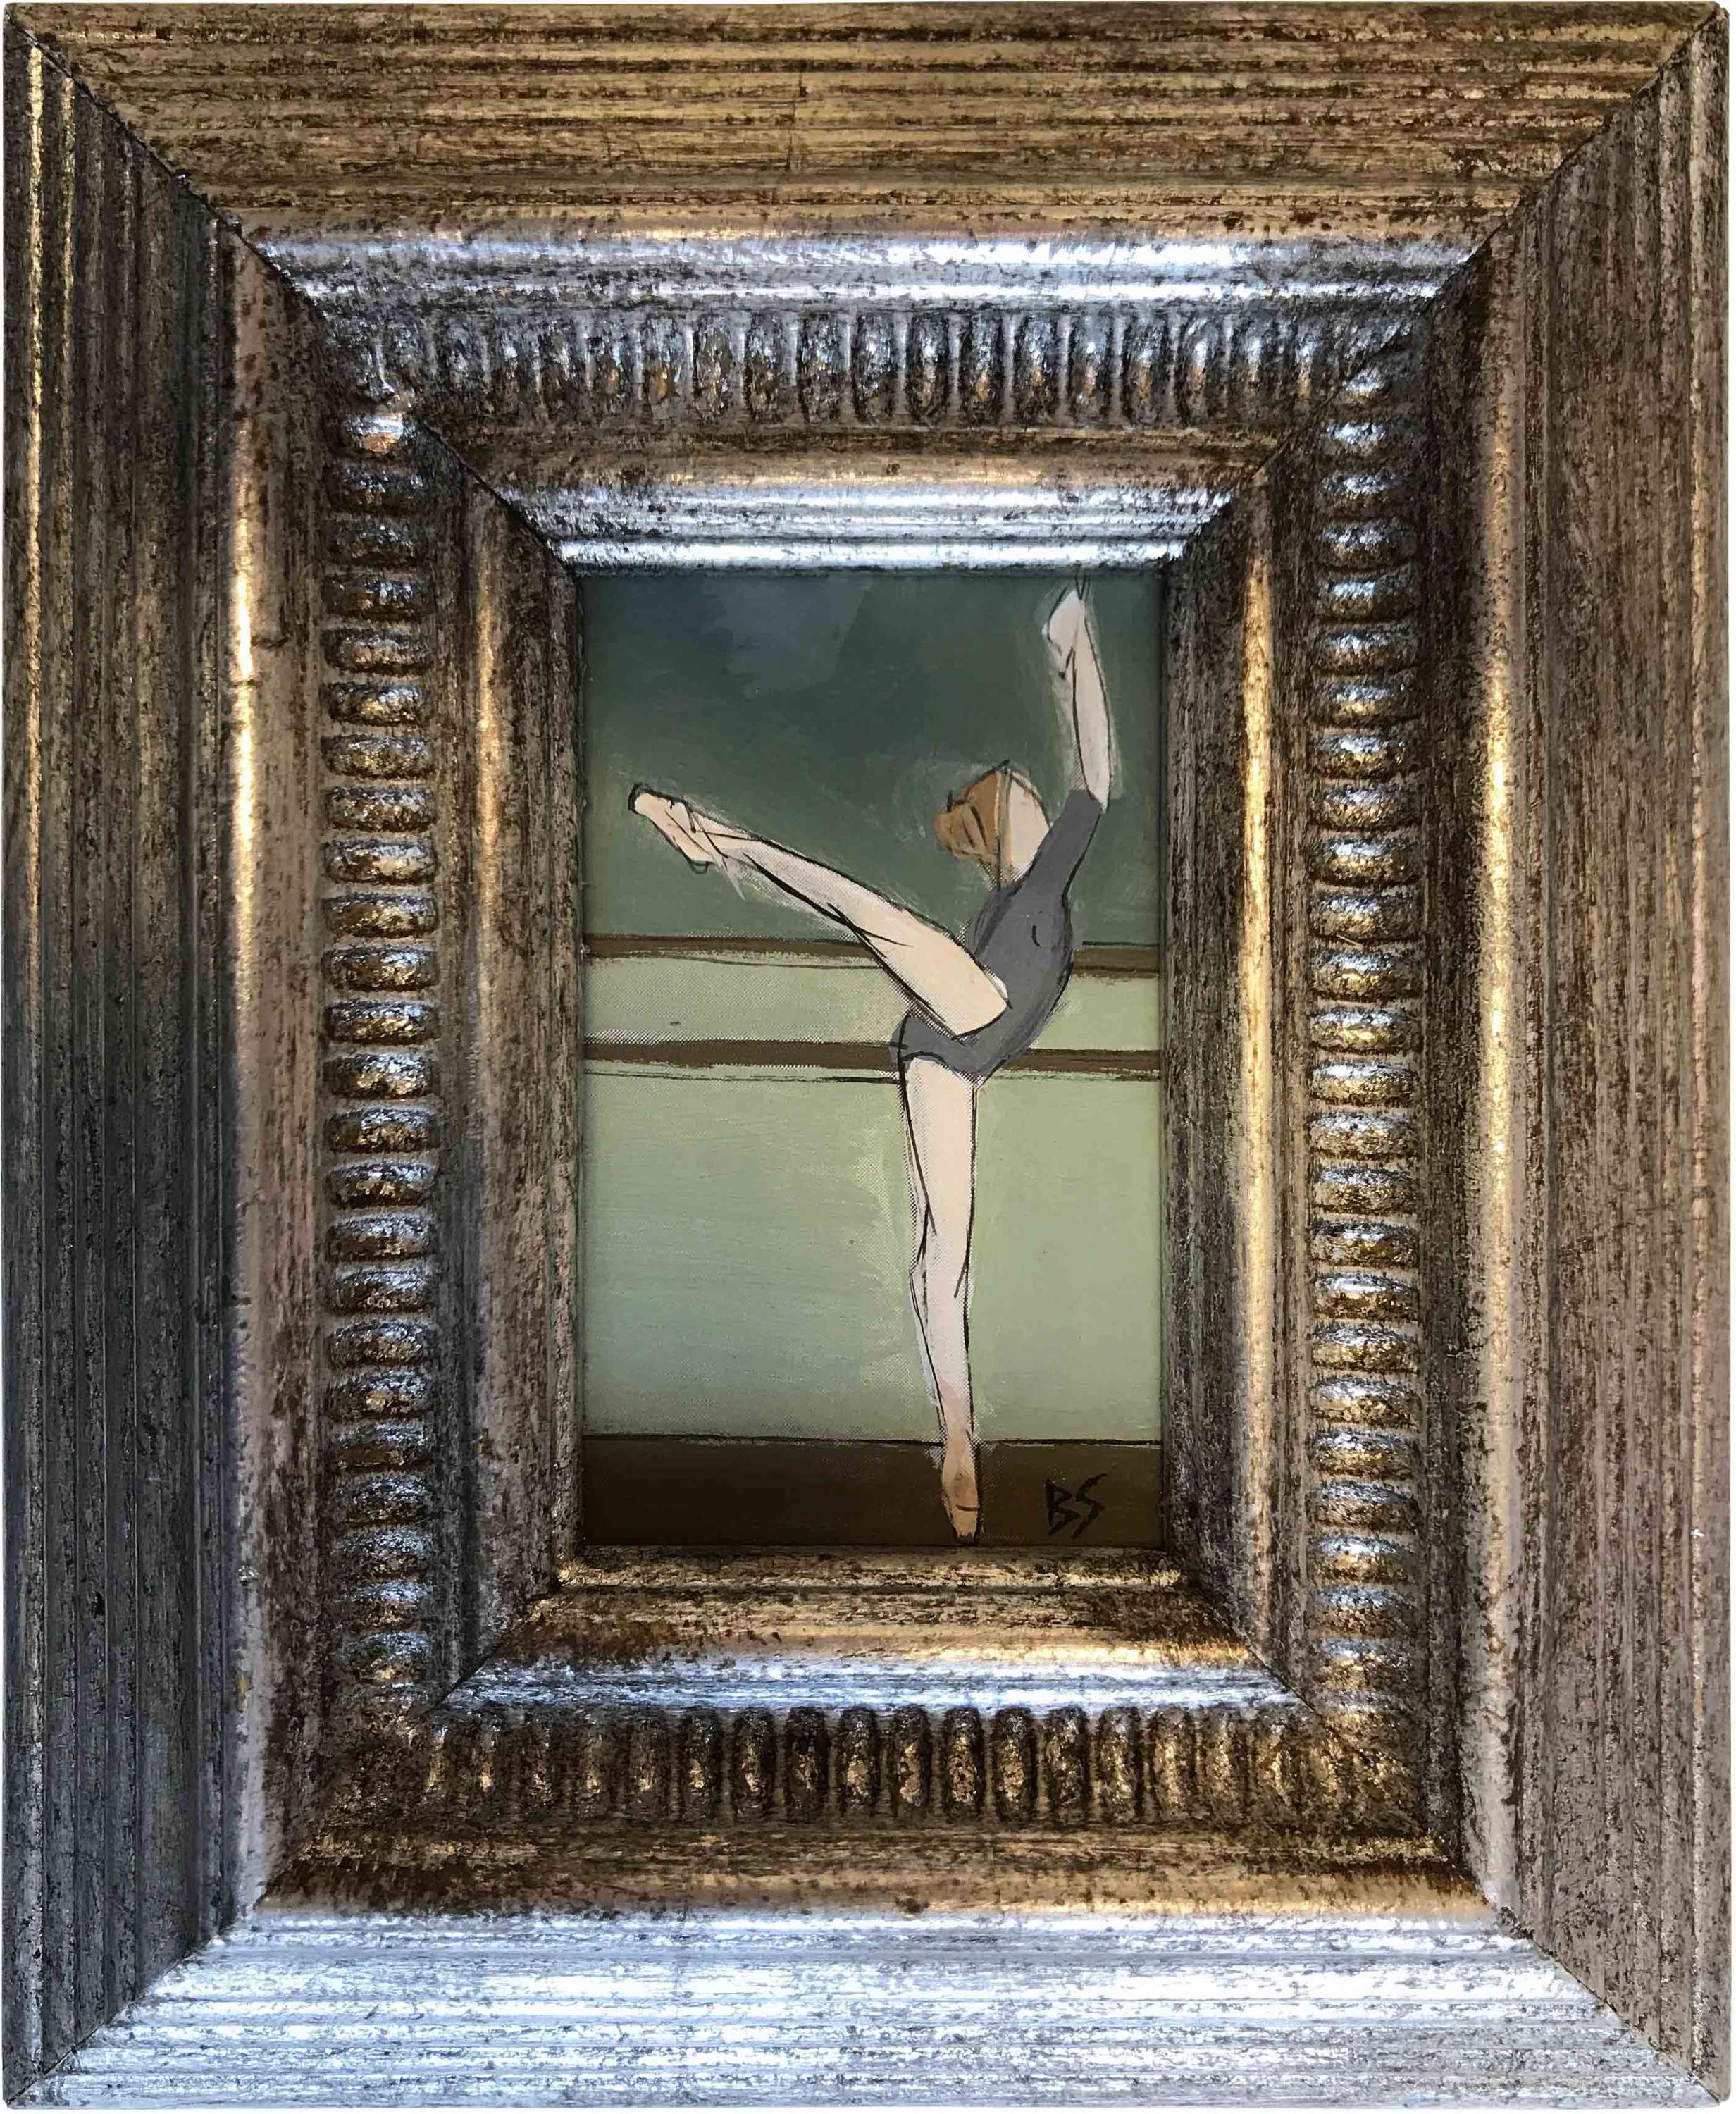 MINIATURE ‘The Barre’ Gouache on Paper in Antique Gold Leaf Frame